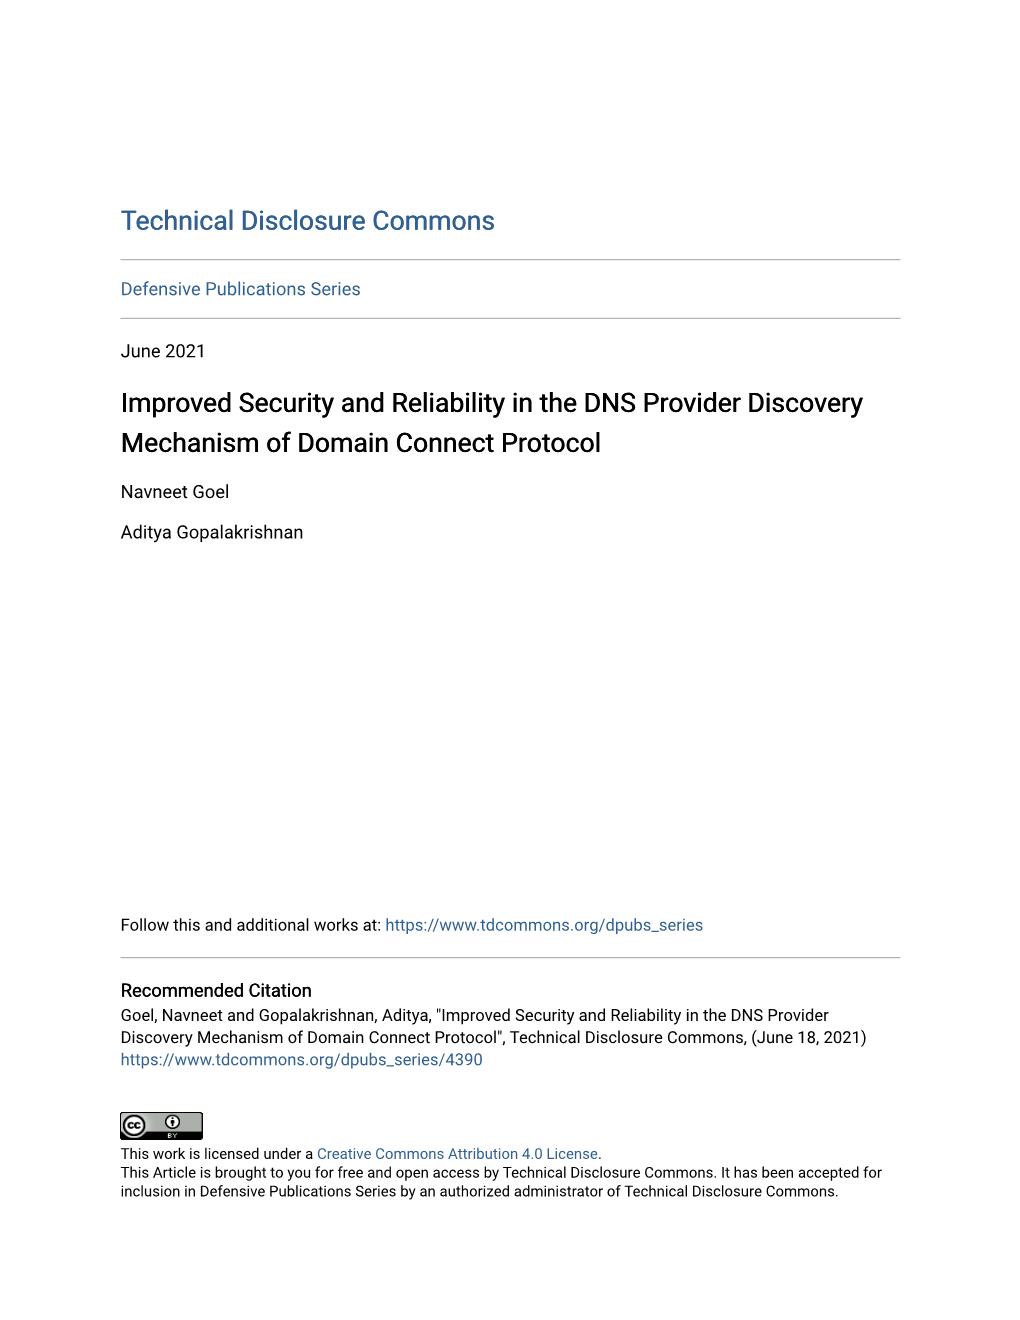 Improved Security and Reliability in the DNS Provider Discovery Mechanism of Domain Connect Protocol